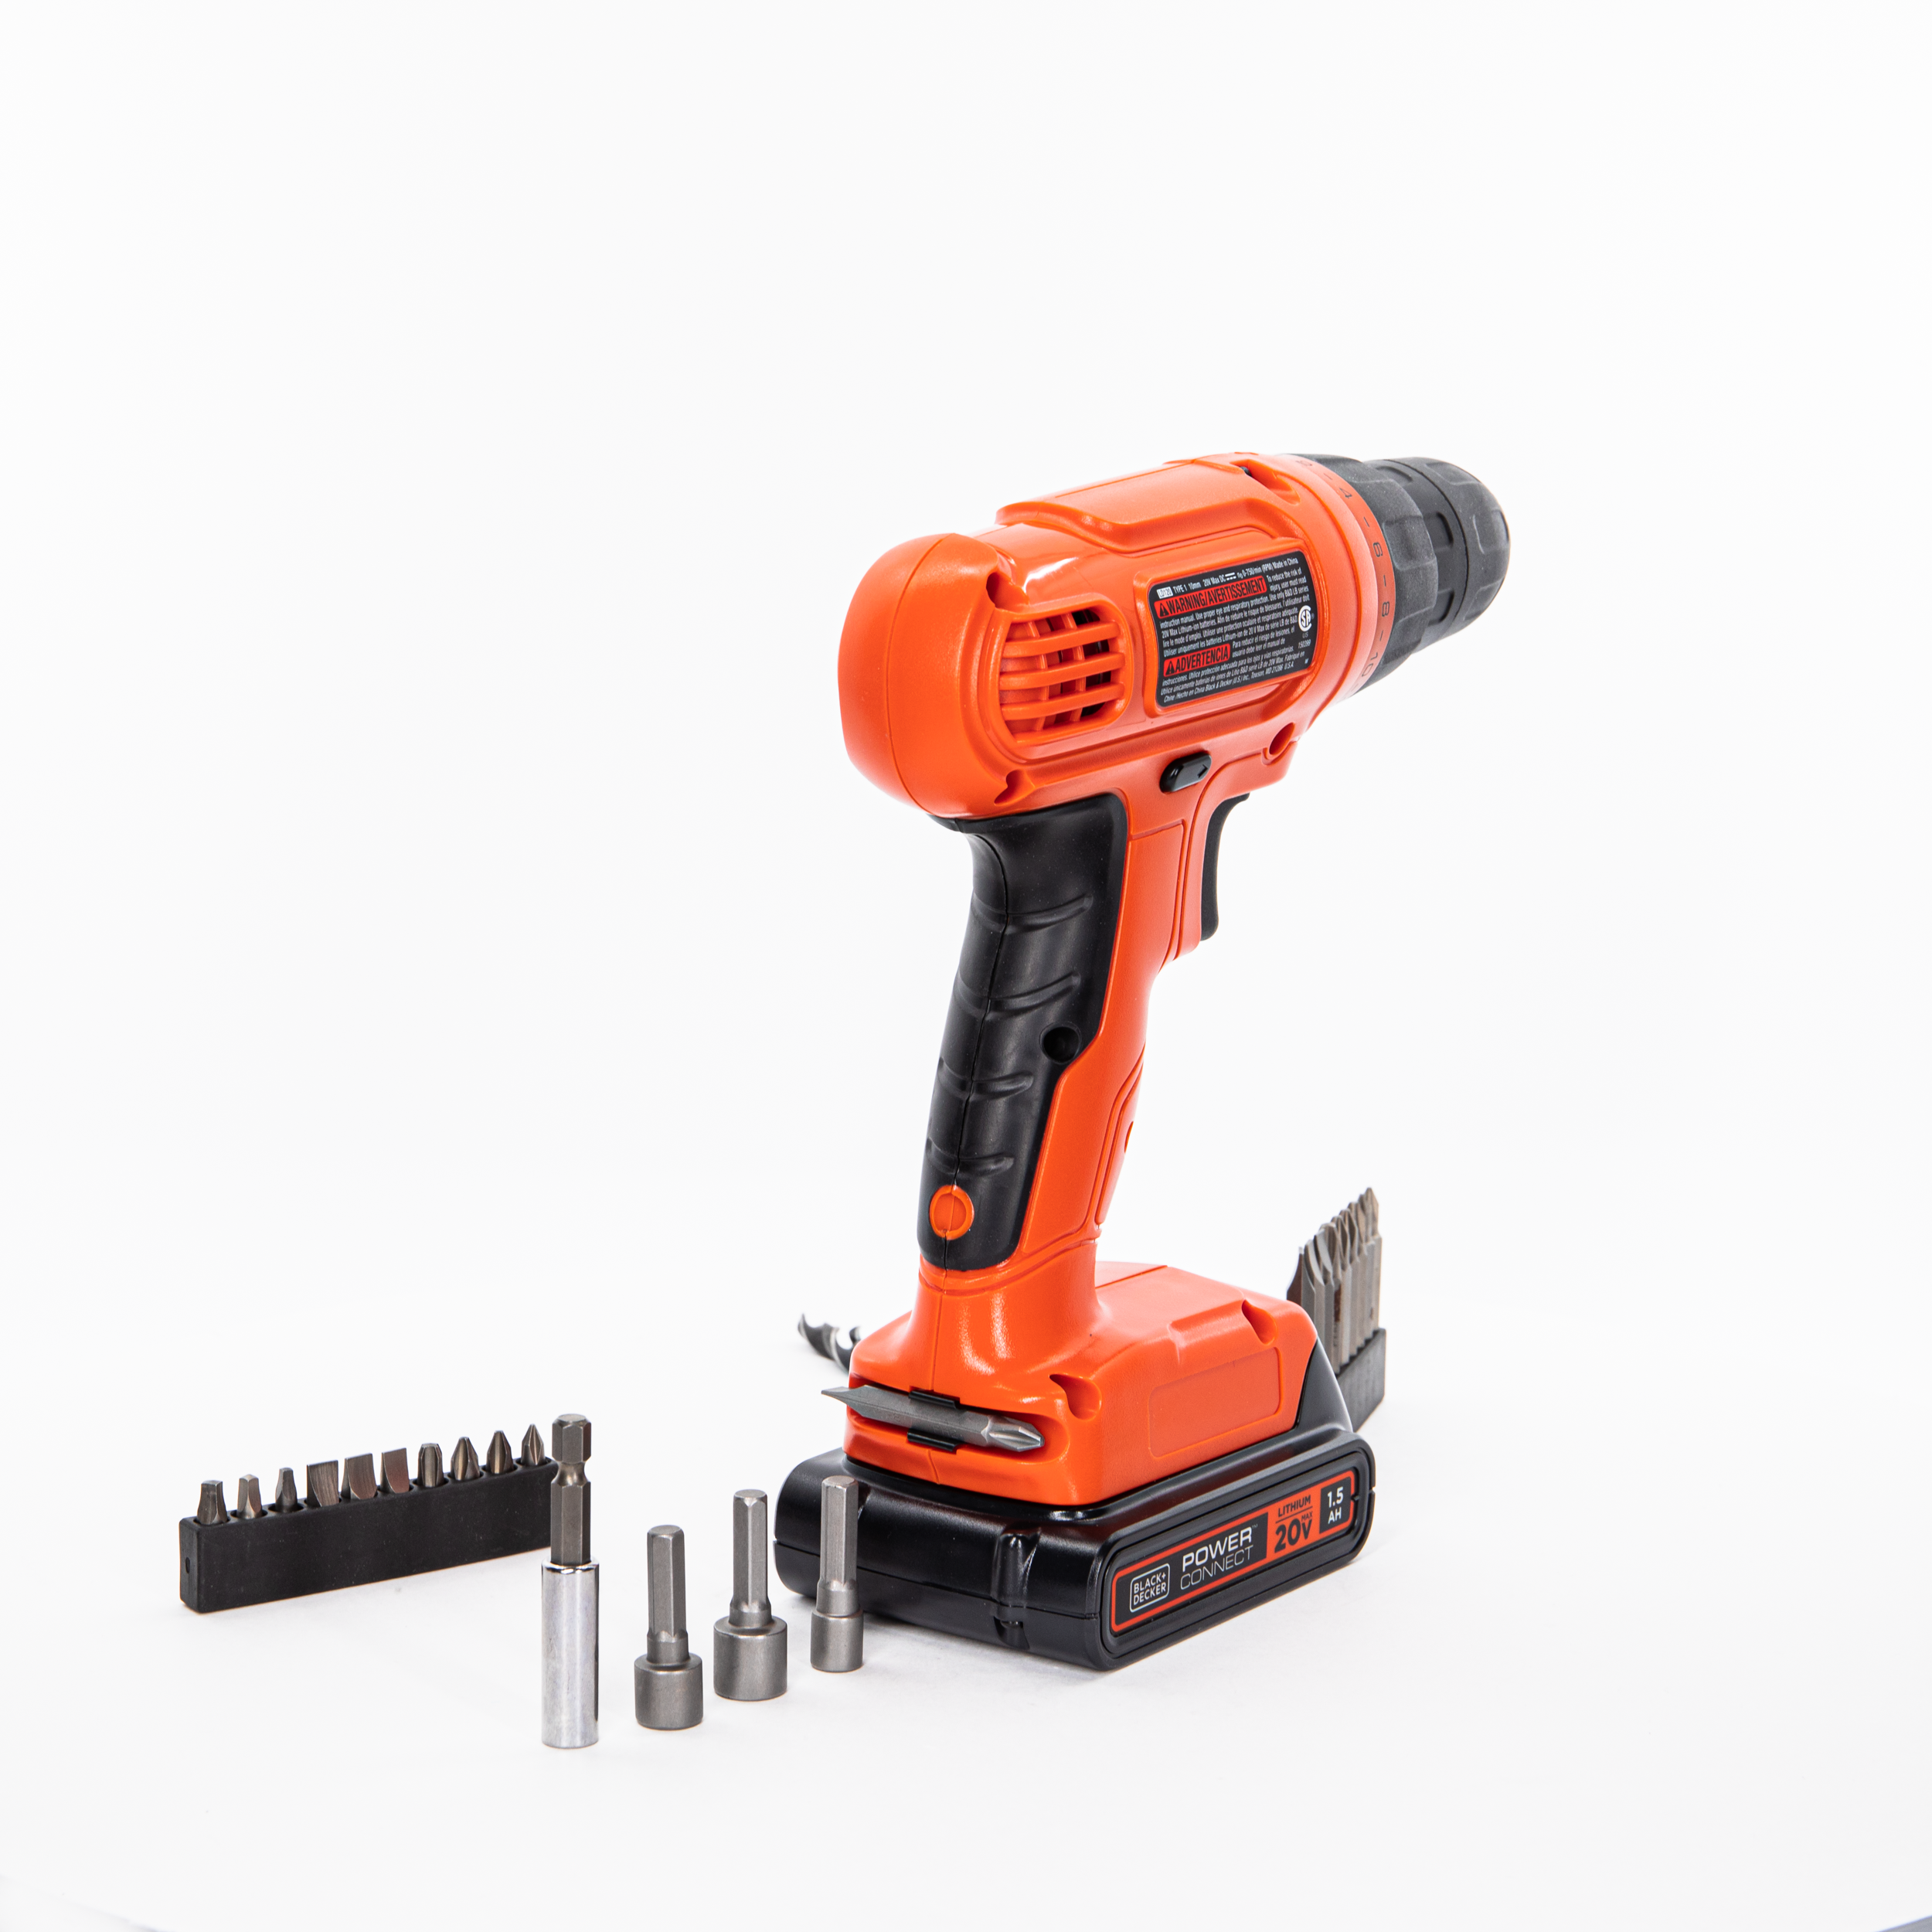  BLACK+DECKER LD120VA 20-Volt Max Lithium Drill/Driver with 30  Accessories and 20V Lithium Cordless Multi-Purpose Inflator (Tool Only) :  Tools & Home Improvement